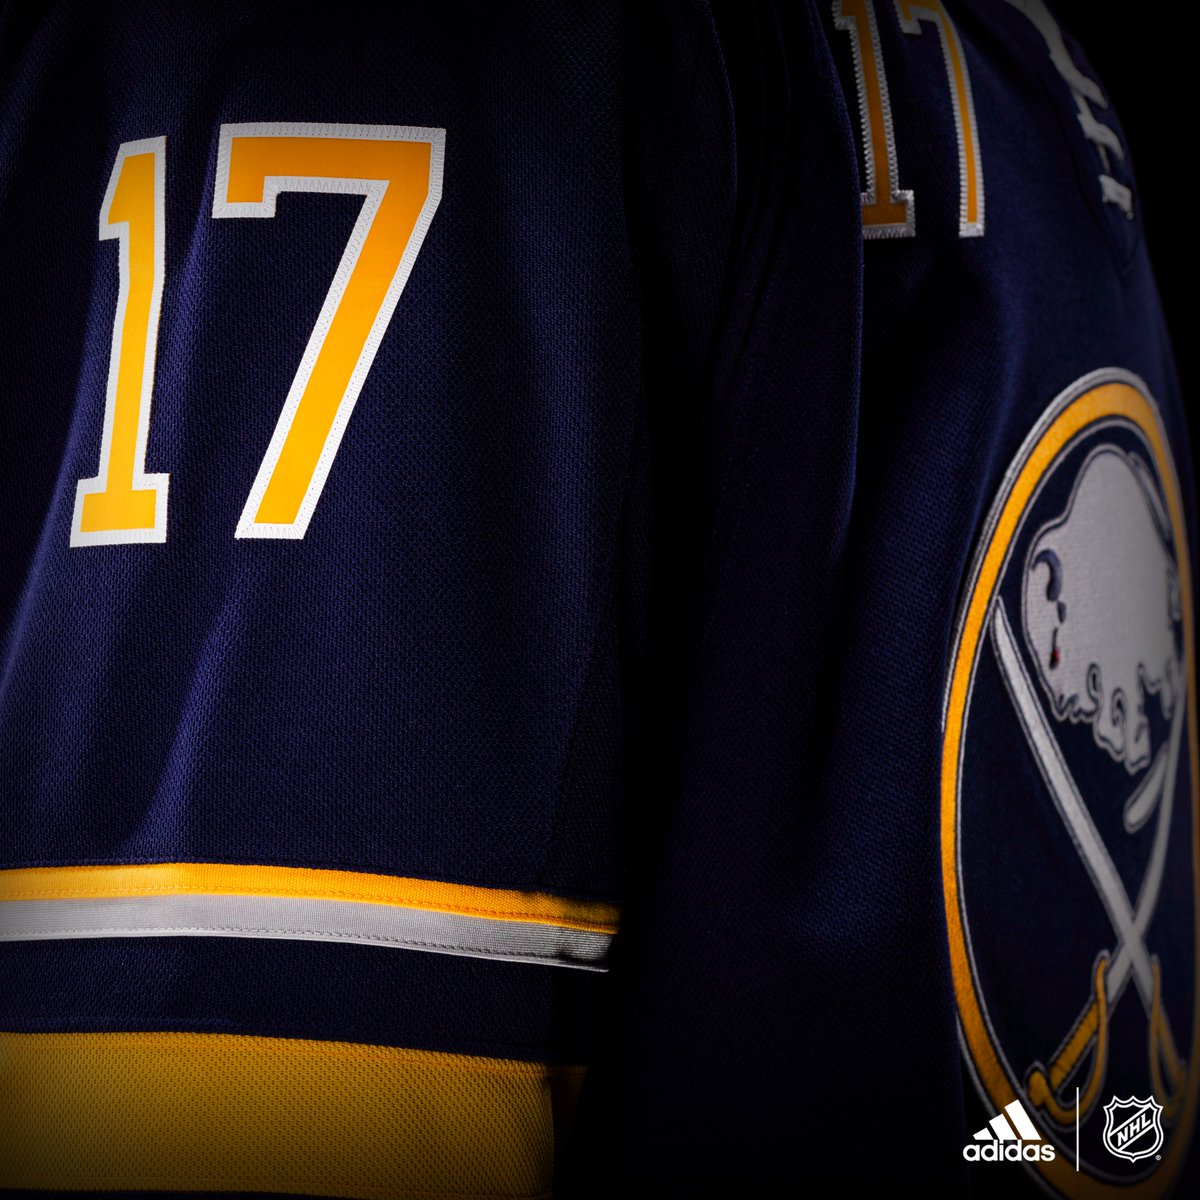 Buffalo Sabres jersey concepts inspired by their 50th anniversary